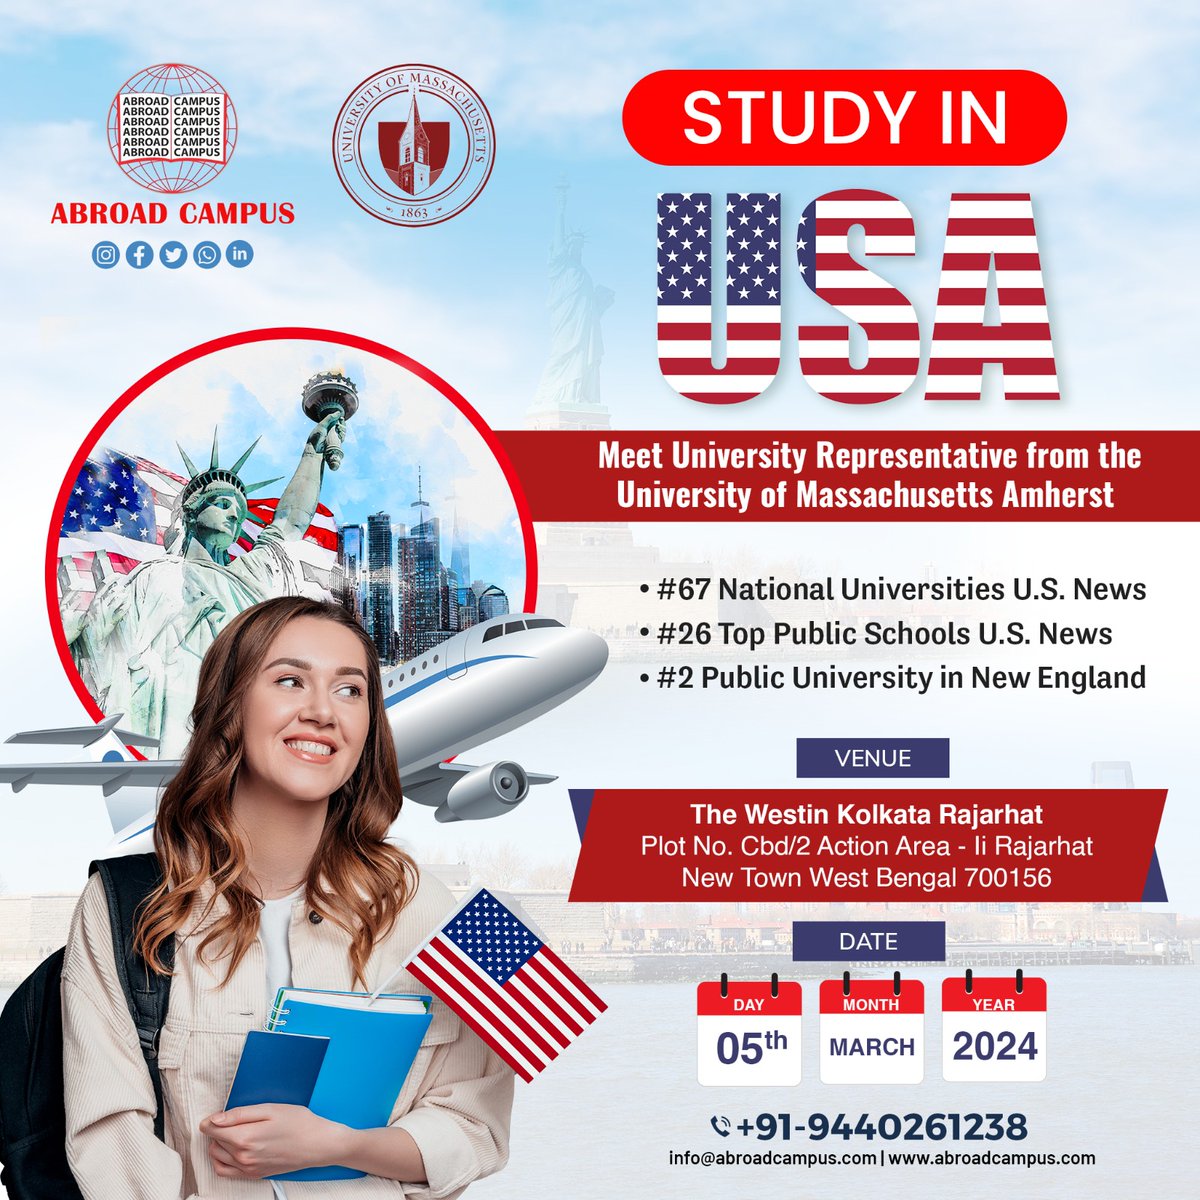 Don't miss out! Mark your calendars and join us to learn more about studying at one of the top universities in the United States. See you there

Contact
 + 91 9440261238 / +91 93976 04297
abroadcampus.com

#visaassistance #studentvisaconsultant #UMassAmherst #KolkataEvent